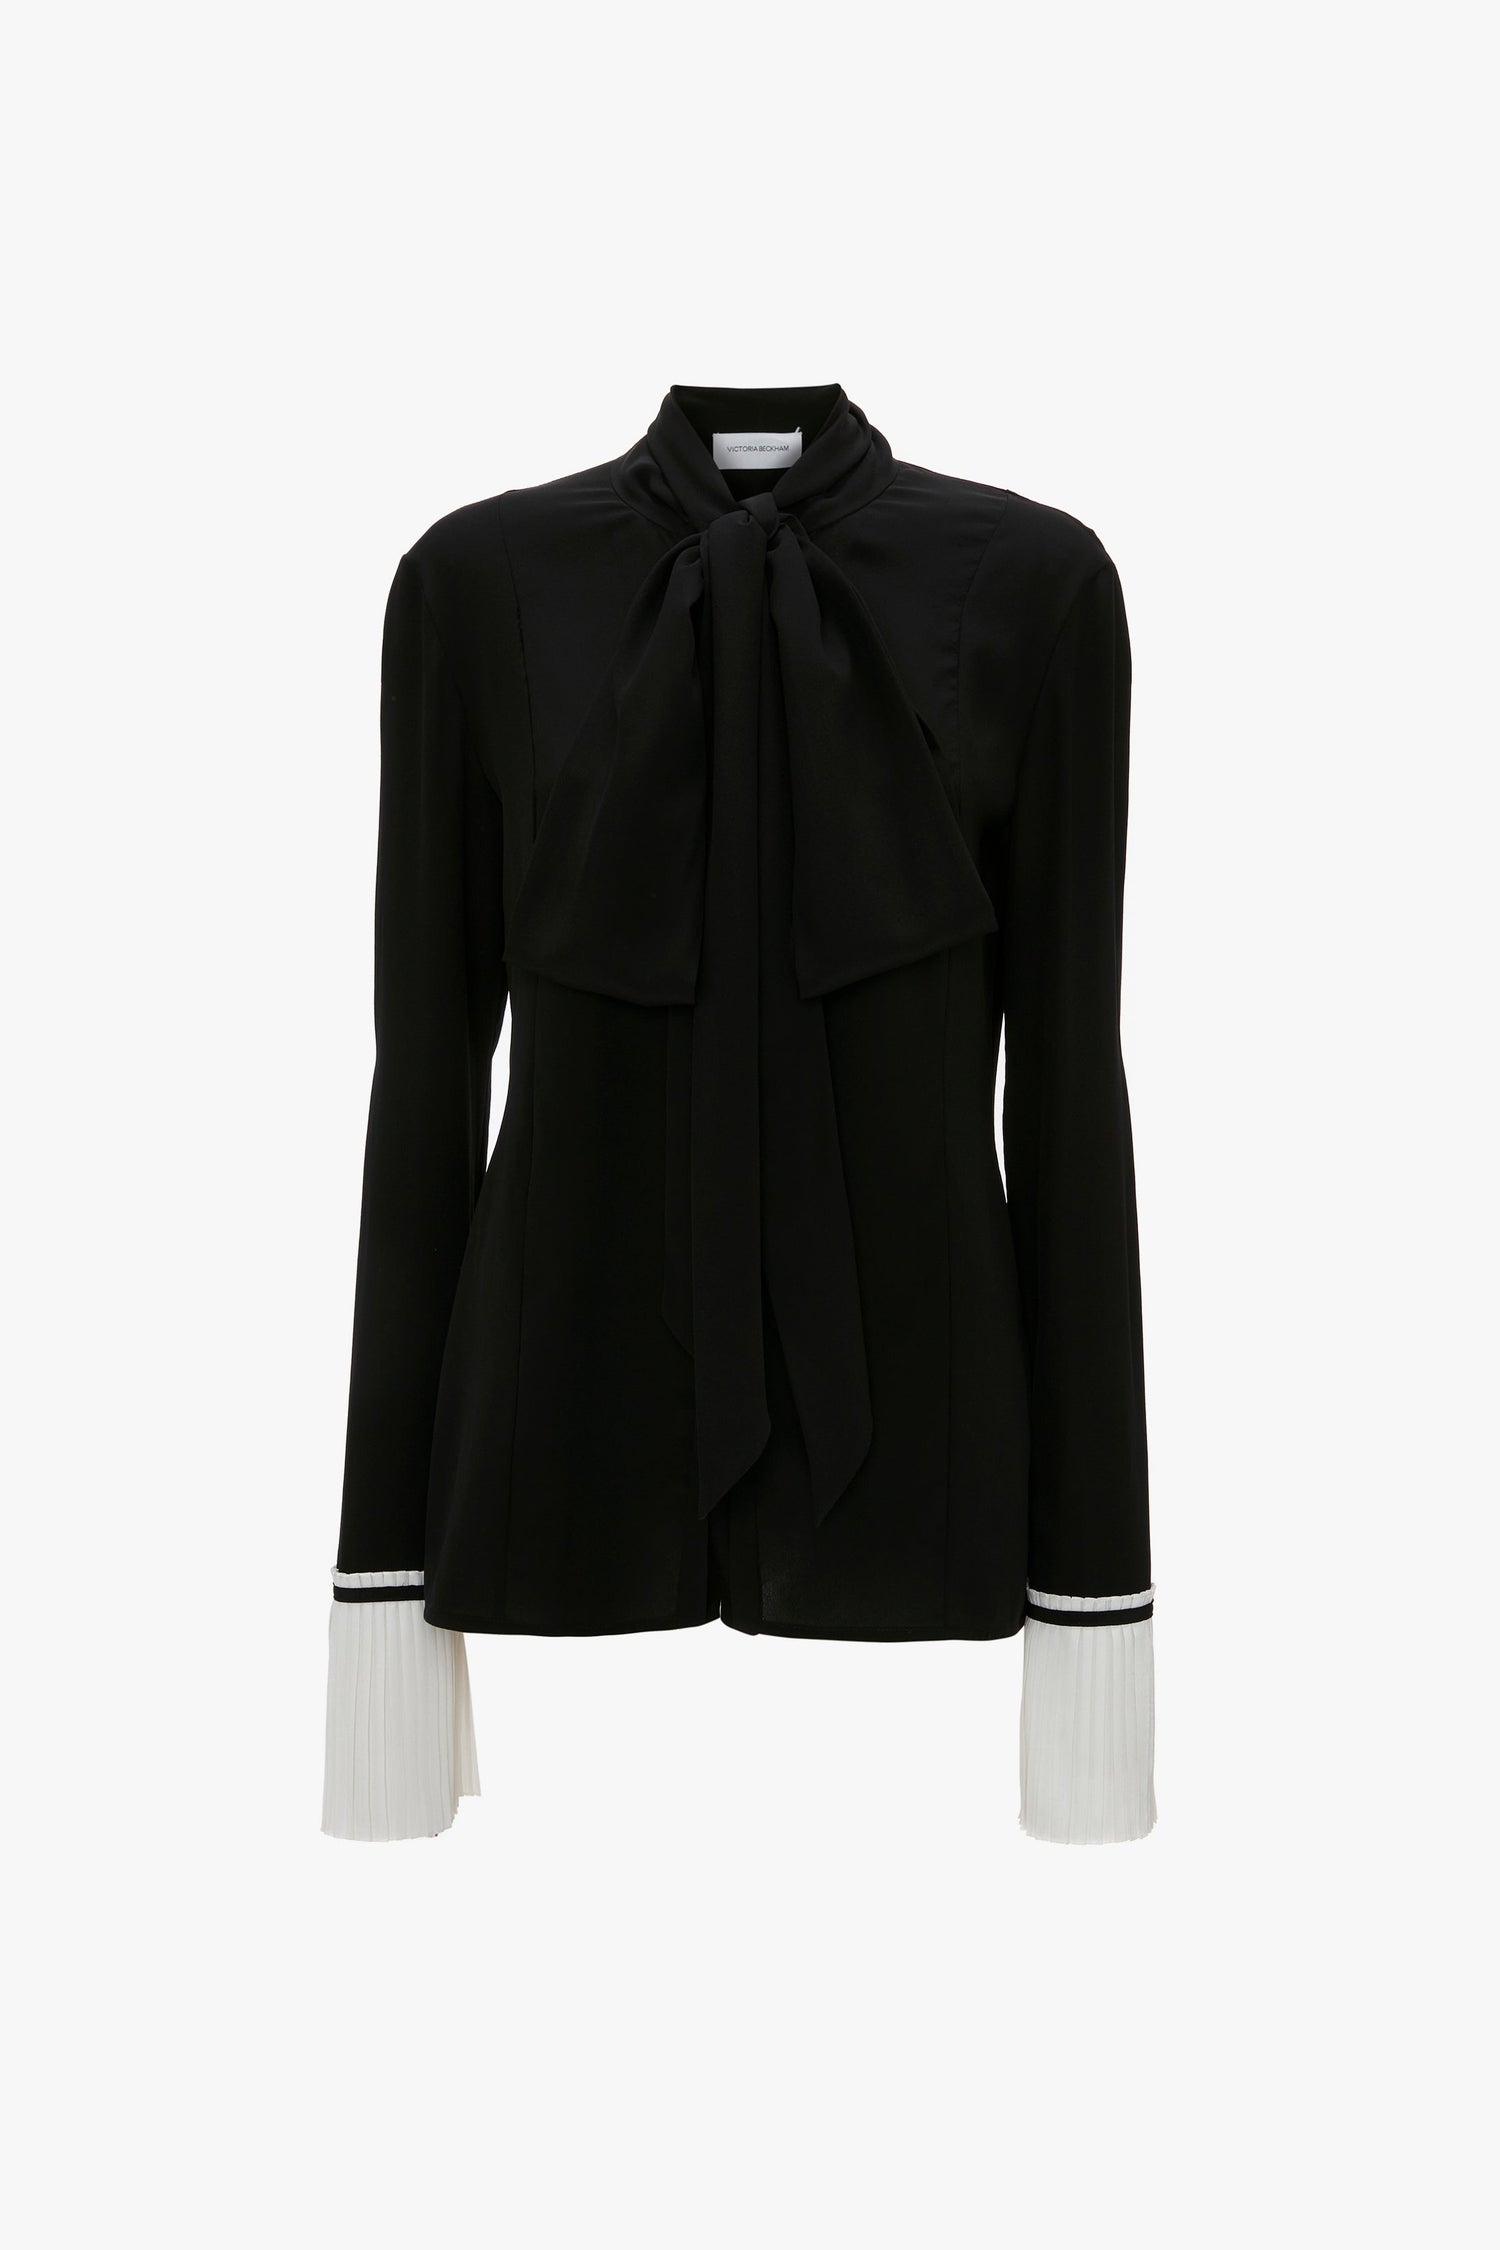 Pleat Cuff Blouse In Black by Victoria Beckham with long sleeves, a tie neck detail at the collar, and knife pleat white cuffs with striped detailing. 100% silk blouse that exudes elegance.